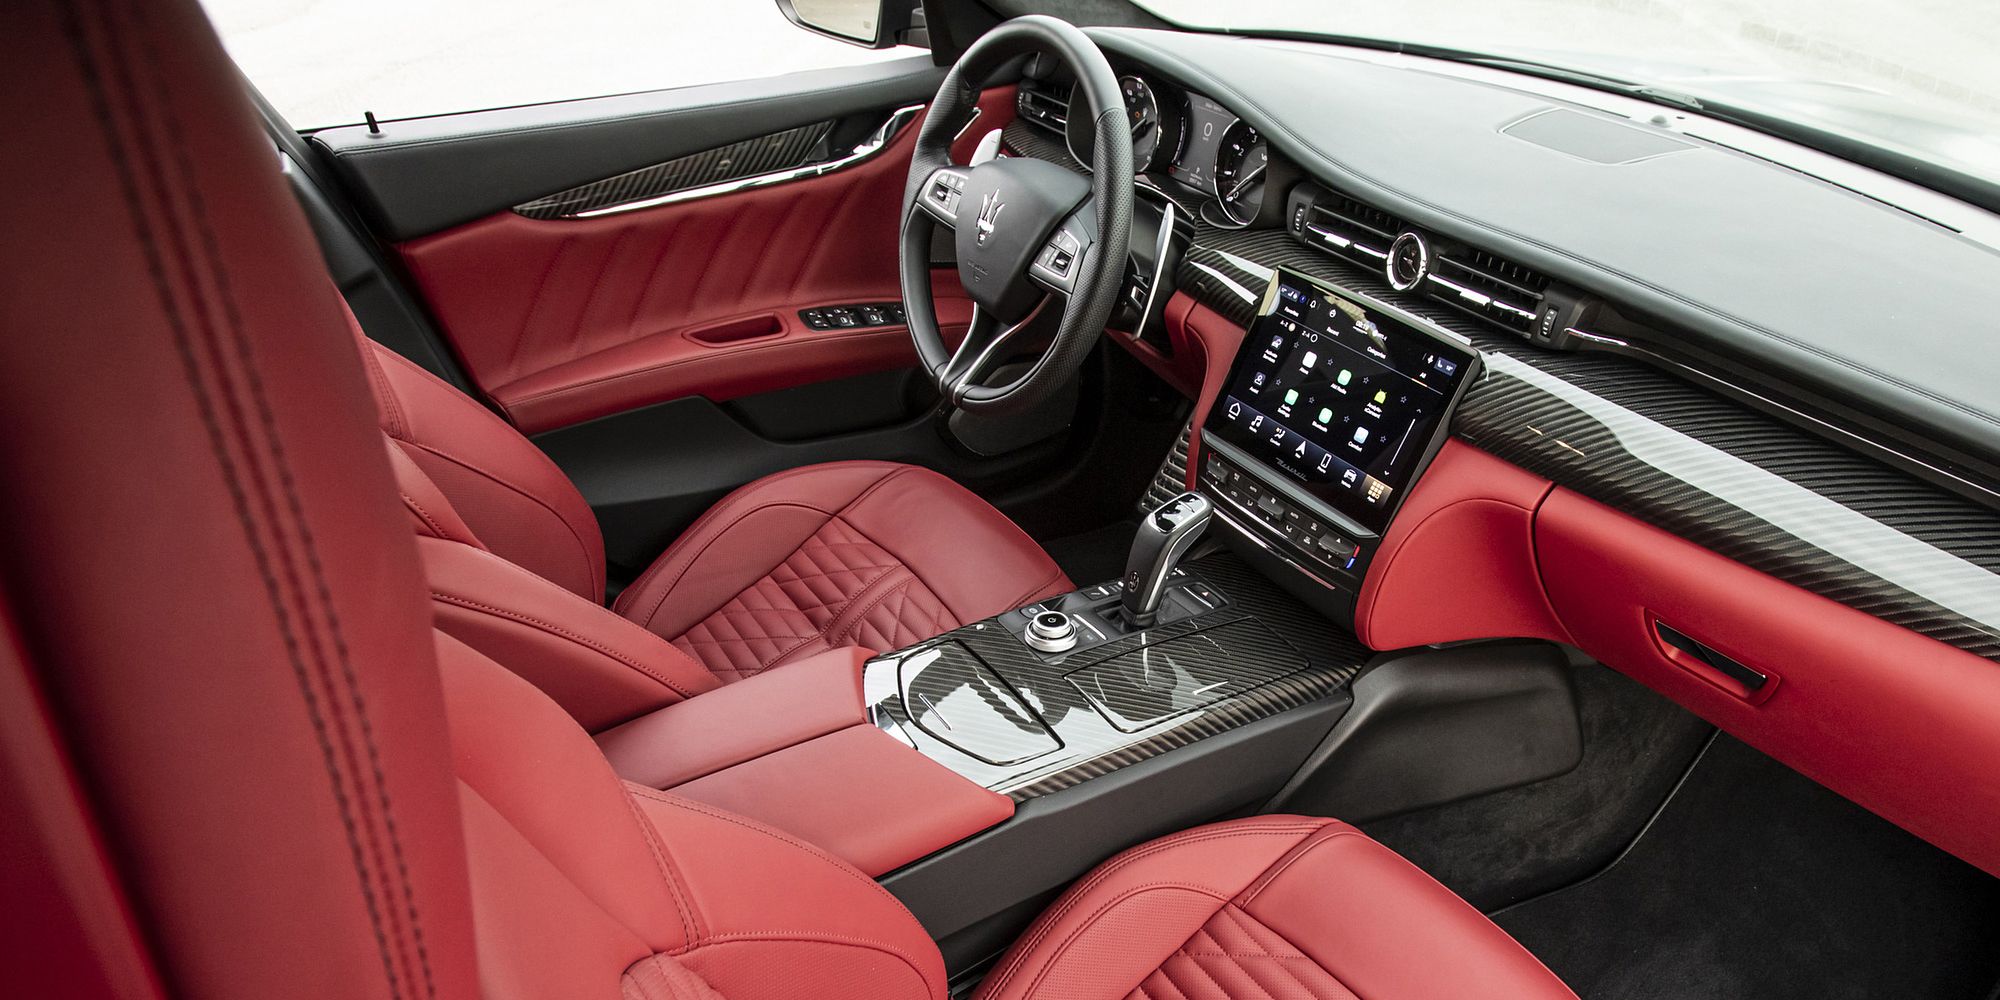 The interior of the new Quattroporte, red leather